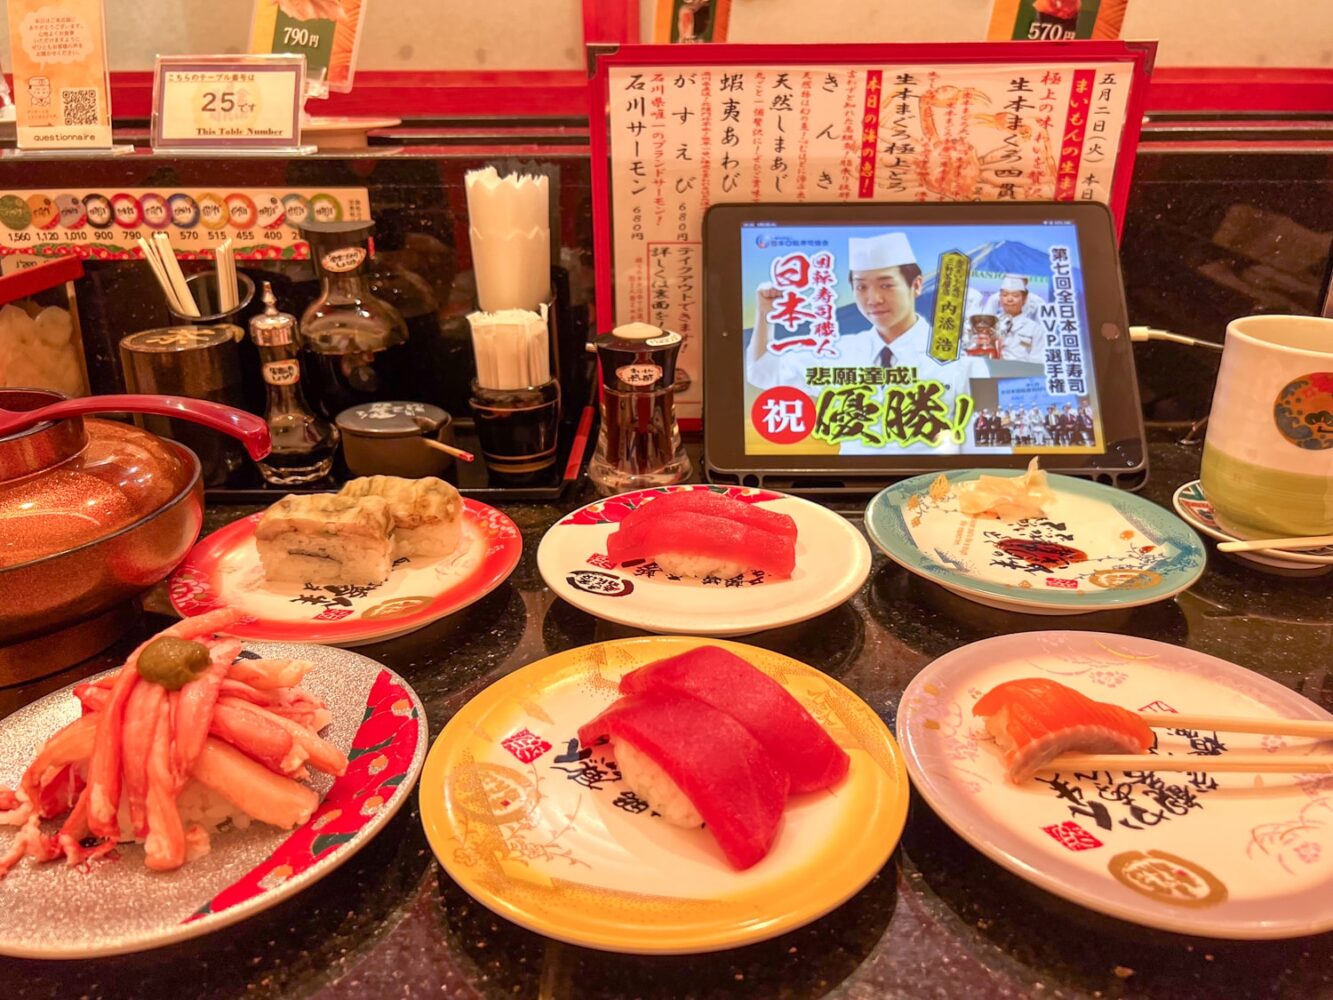 Mini plates with conveyor belt sushi inside a typical sushi restaurant in Tokyo.